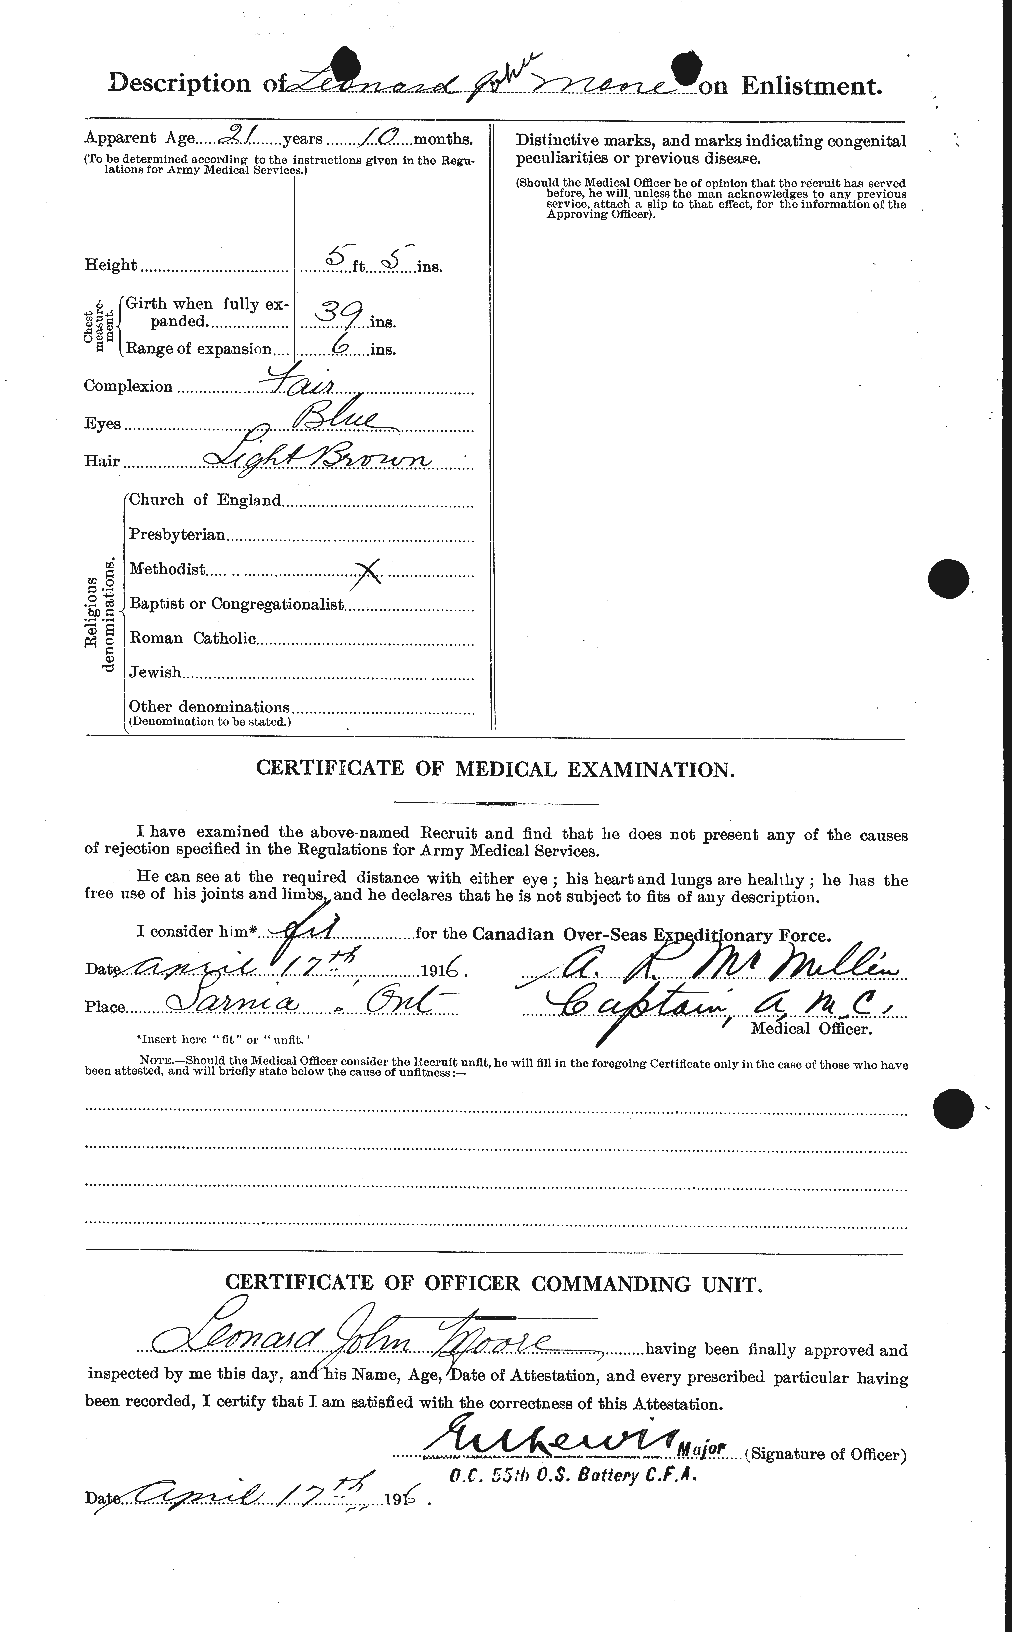 Personnel Records of the First World War - CEF 503405b